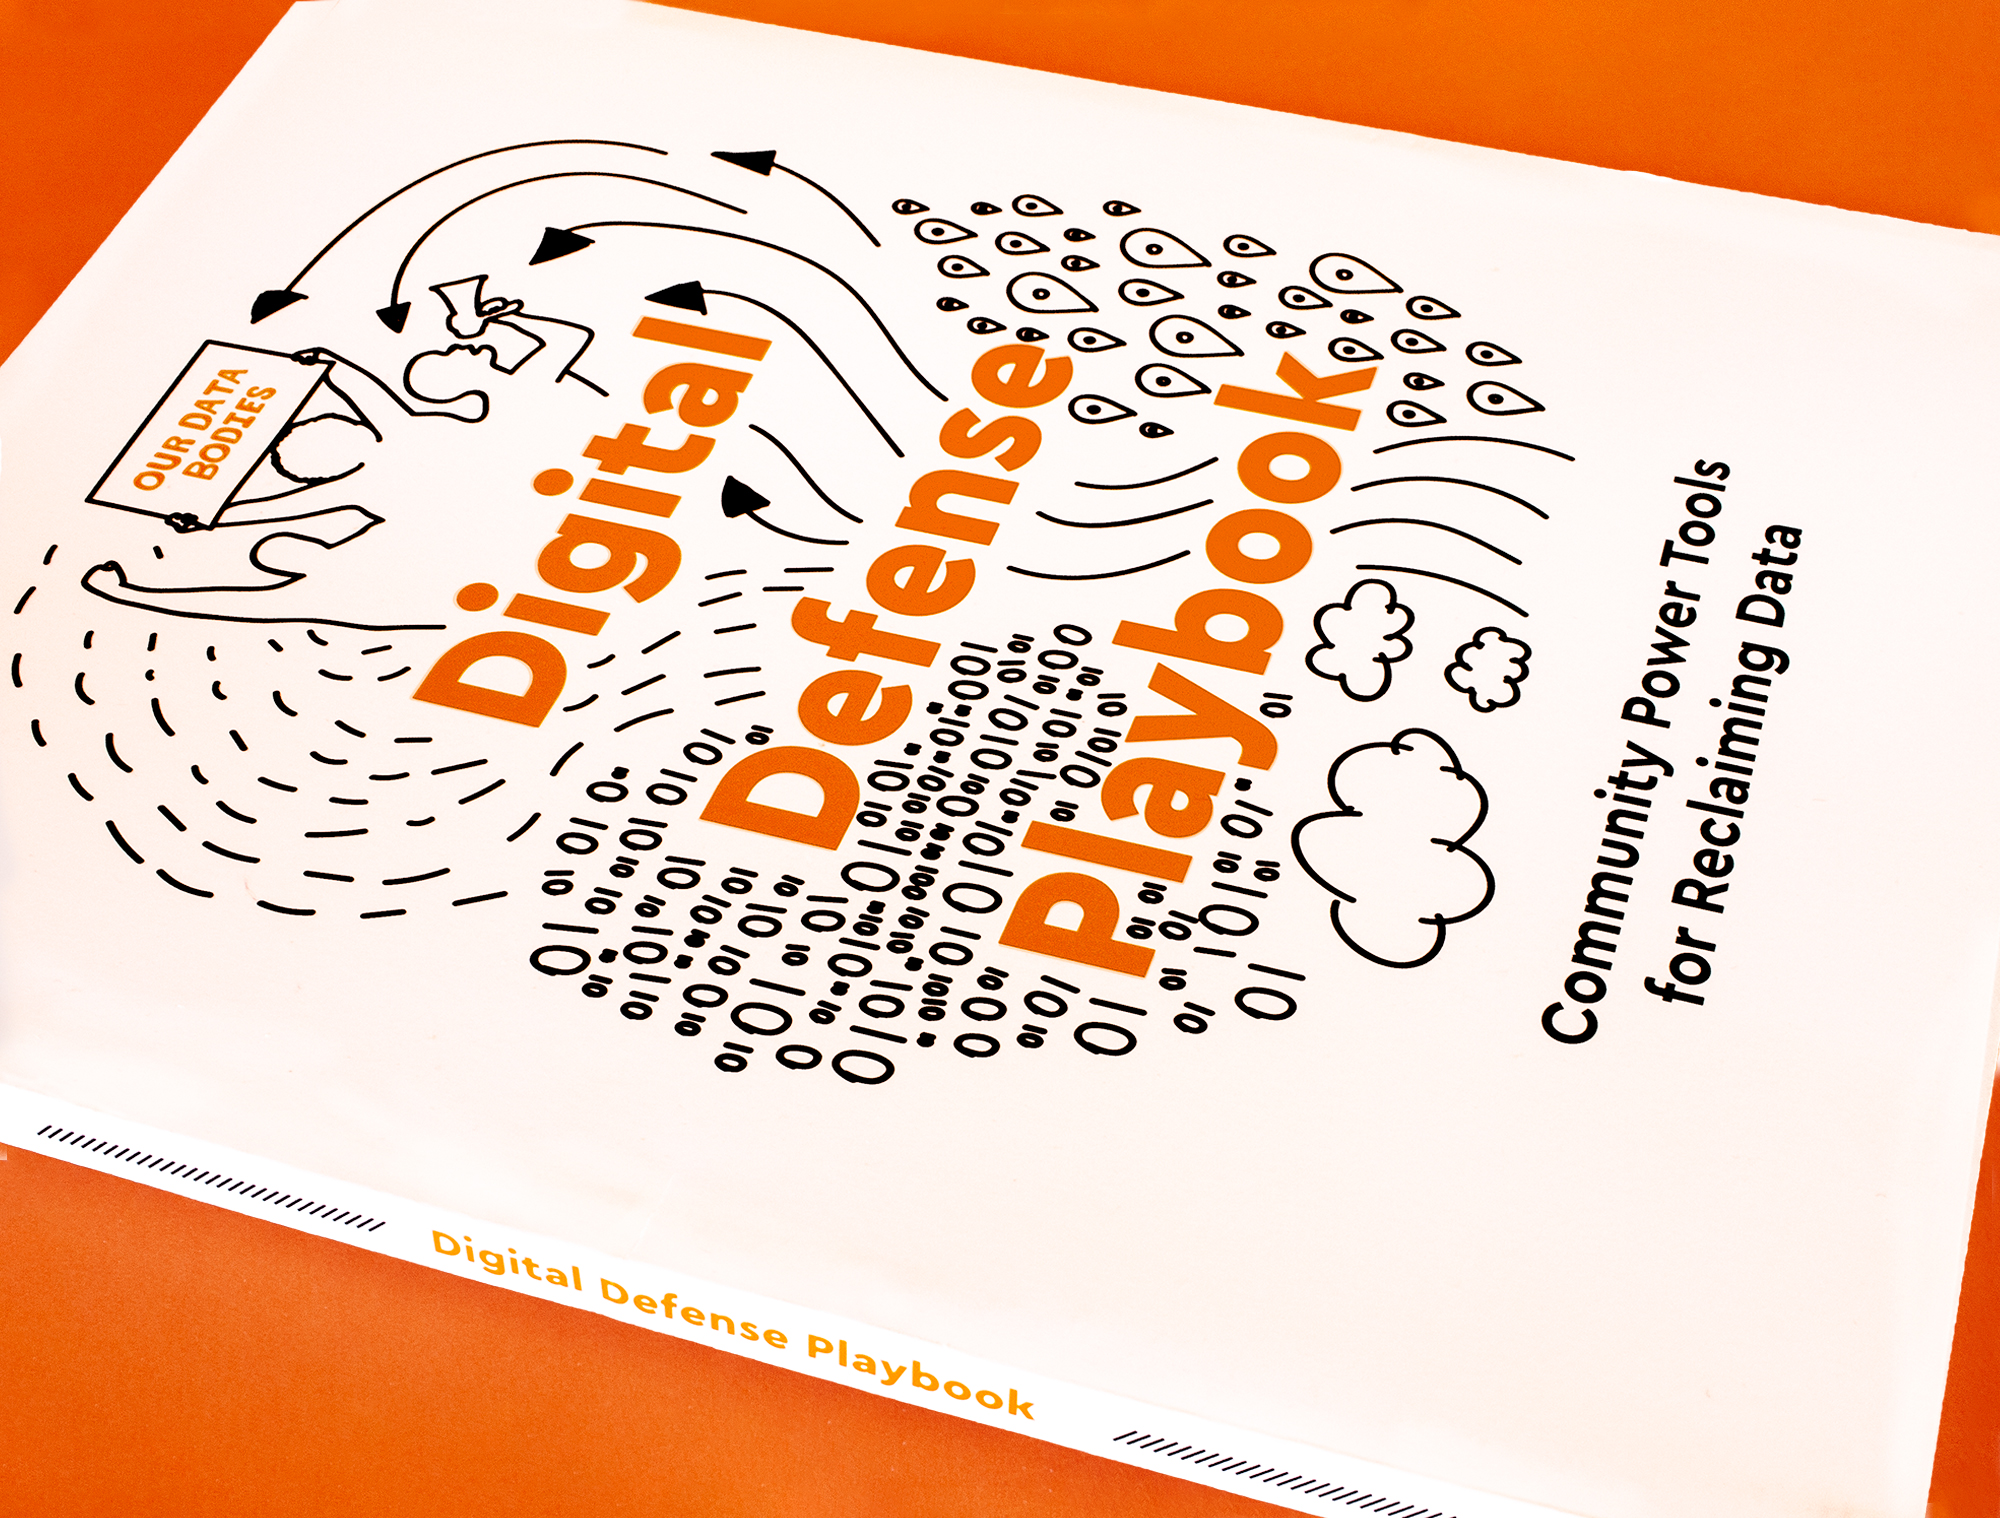 Photo: Front cover of the Digital Defence Playbook: Community Power Tools for Reclaiming Data. Illustration of data, arrows, lines, clouds, flowing upward towards 3 community members holding a sign that says “Our Data Bodies.”